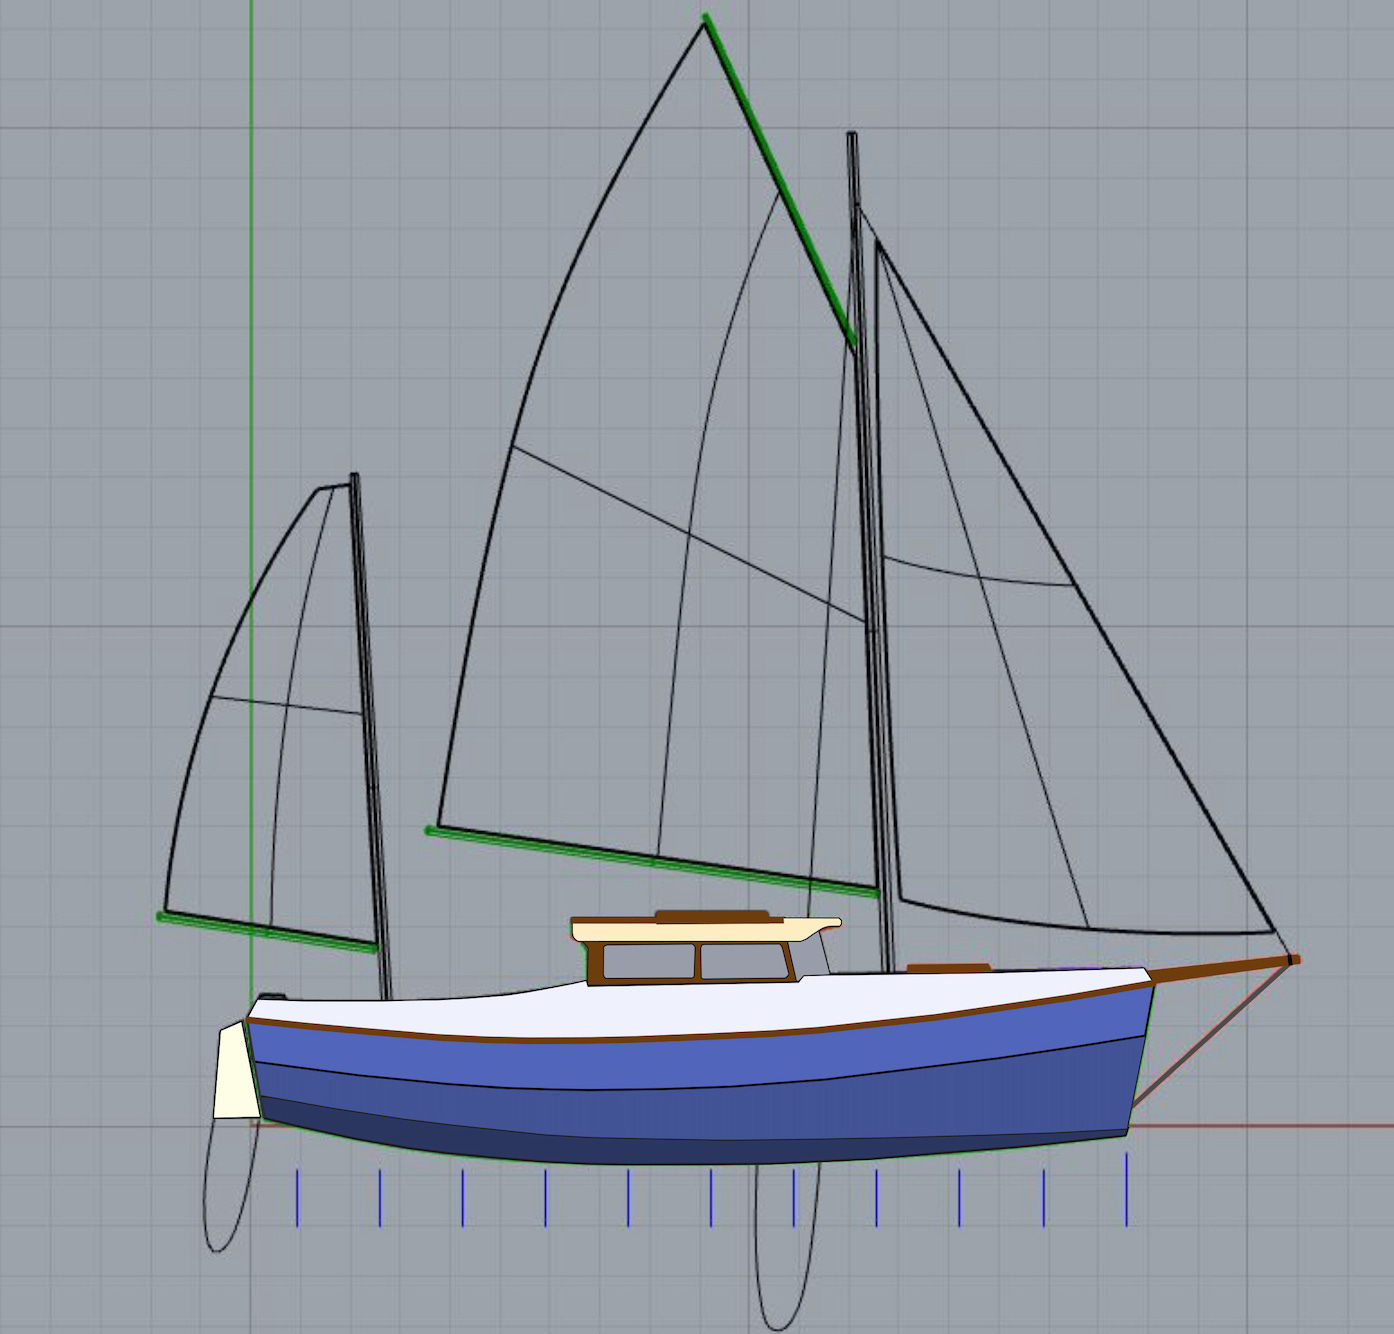 It's time to create! Challenge yourself with this 3D Swinging Boat